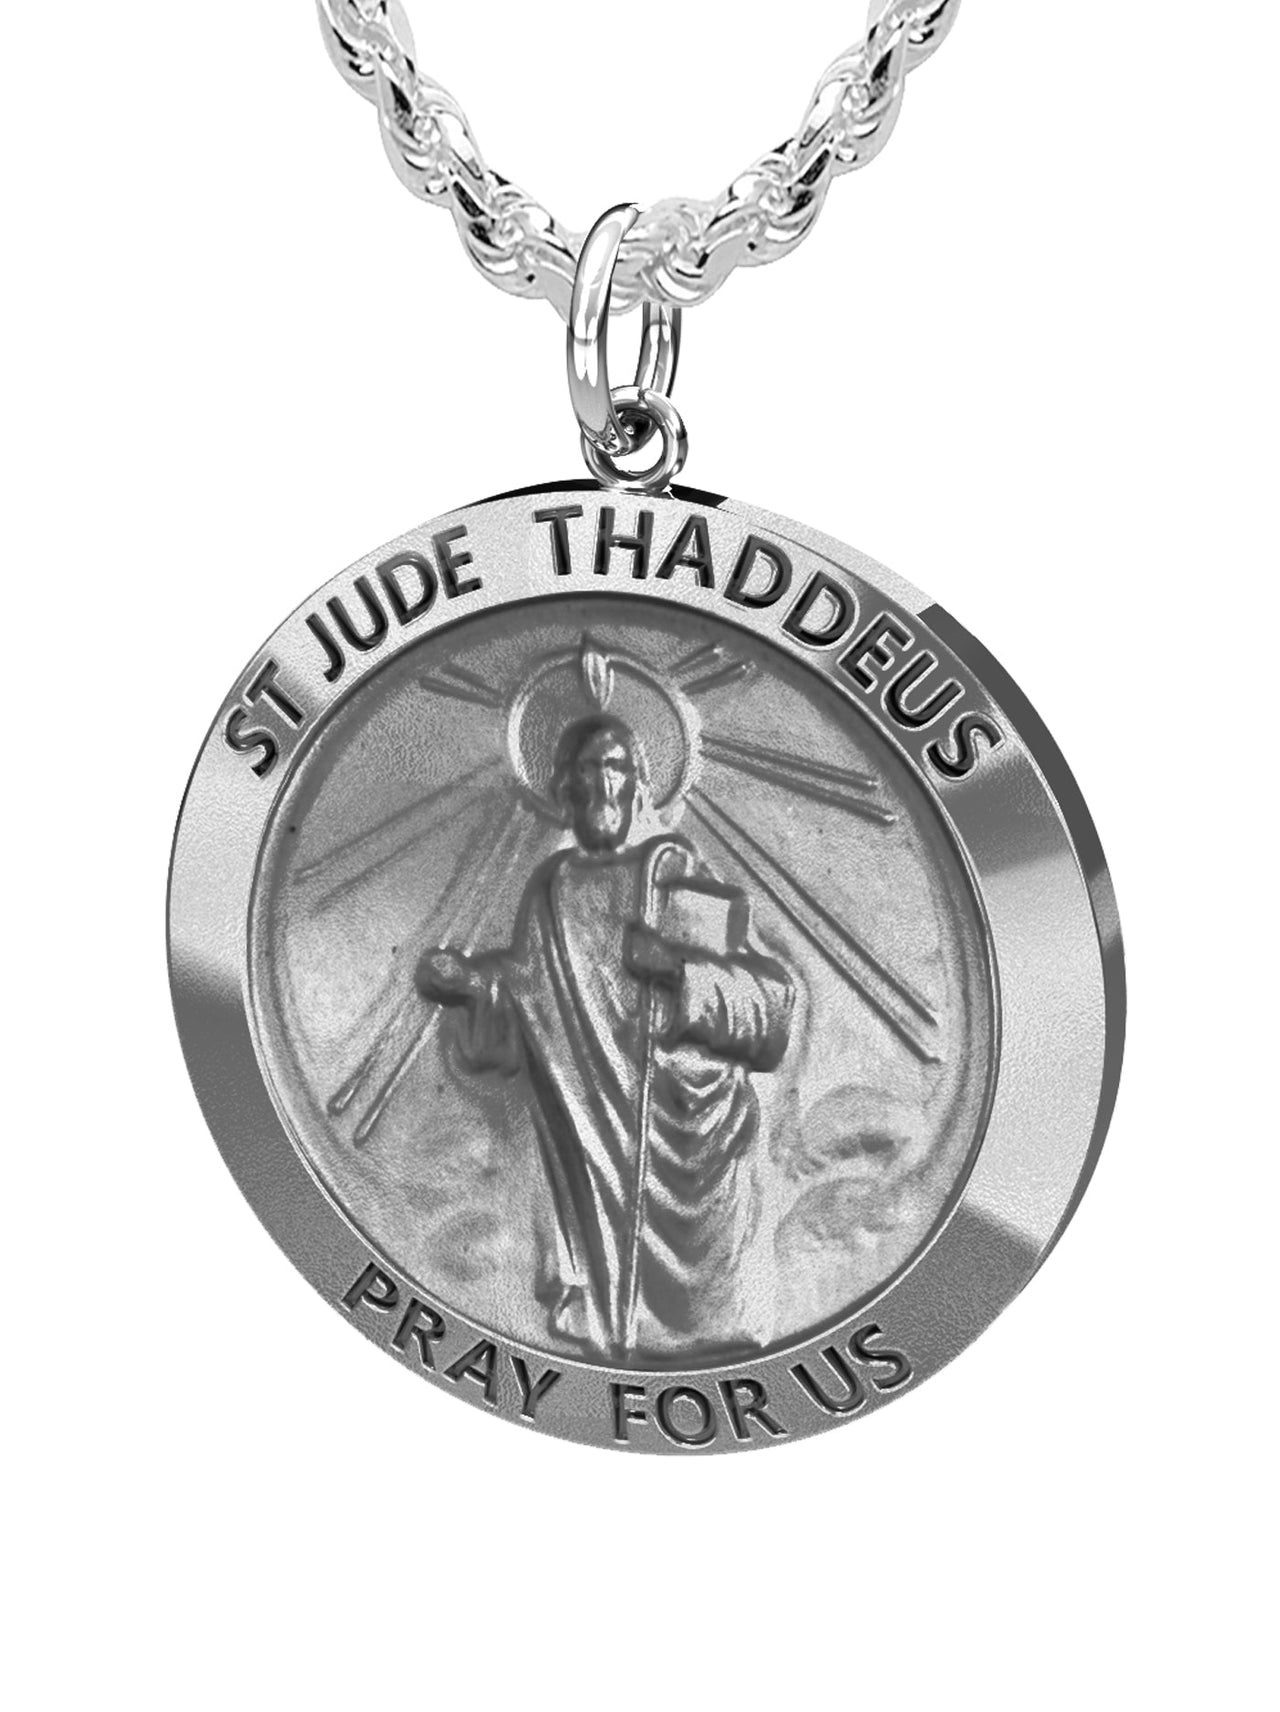 Men's 1.0in 925 Sterling Silver Saint Jude Thaddeus Round Pendant Necklace, 25mm - US Jewels